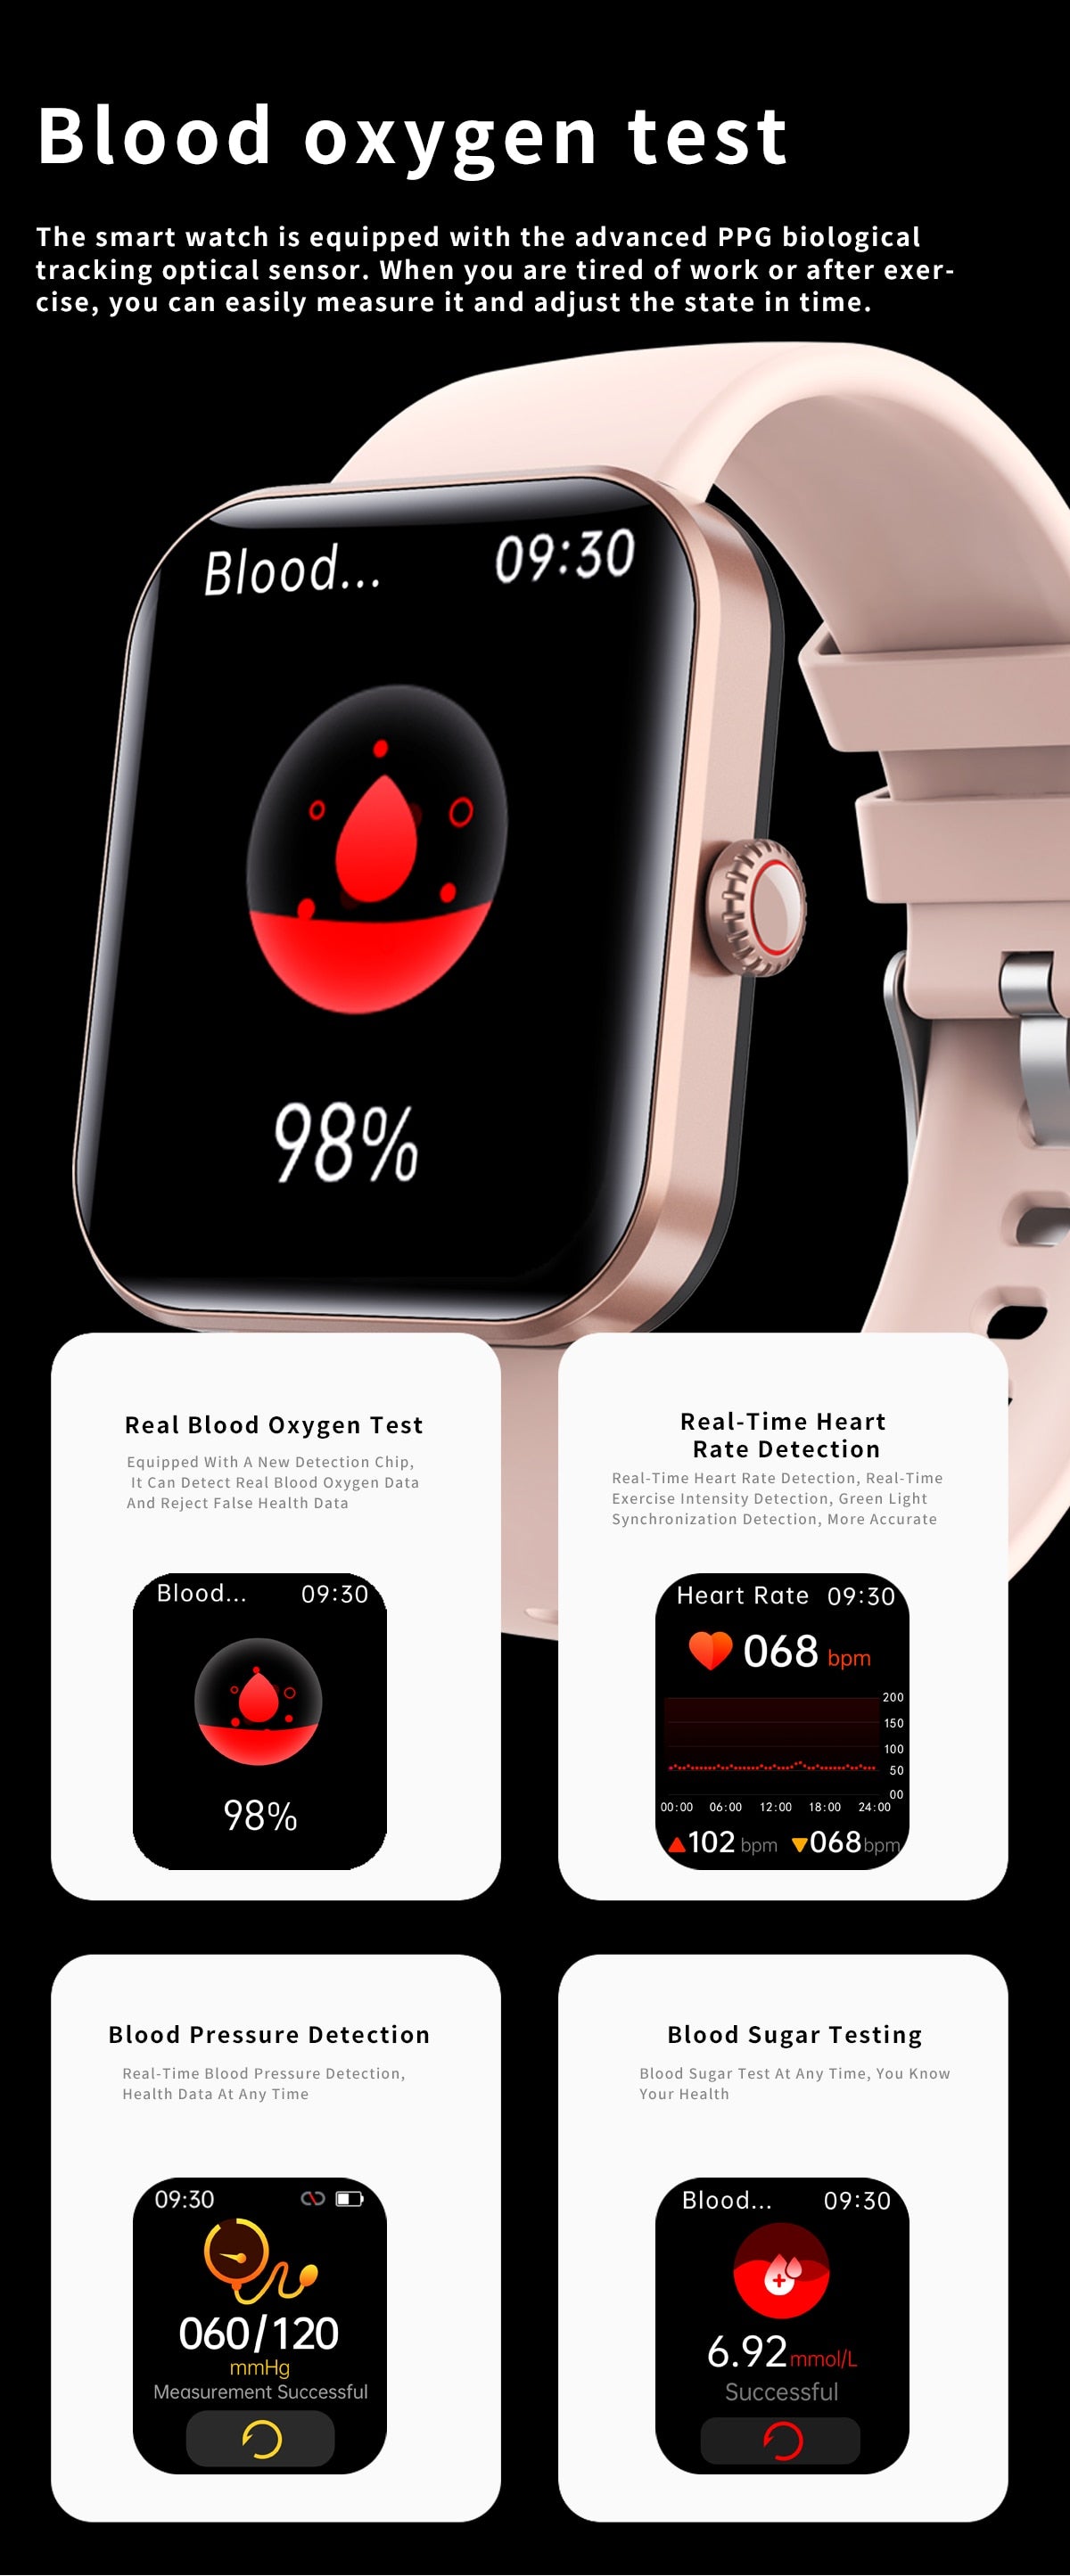 [All day monitoring of heart rate and blood pressure] Bluetooth fashion watch